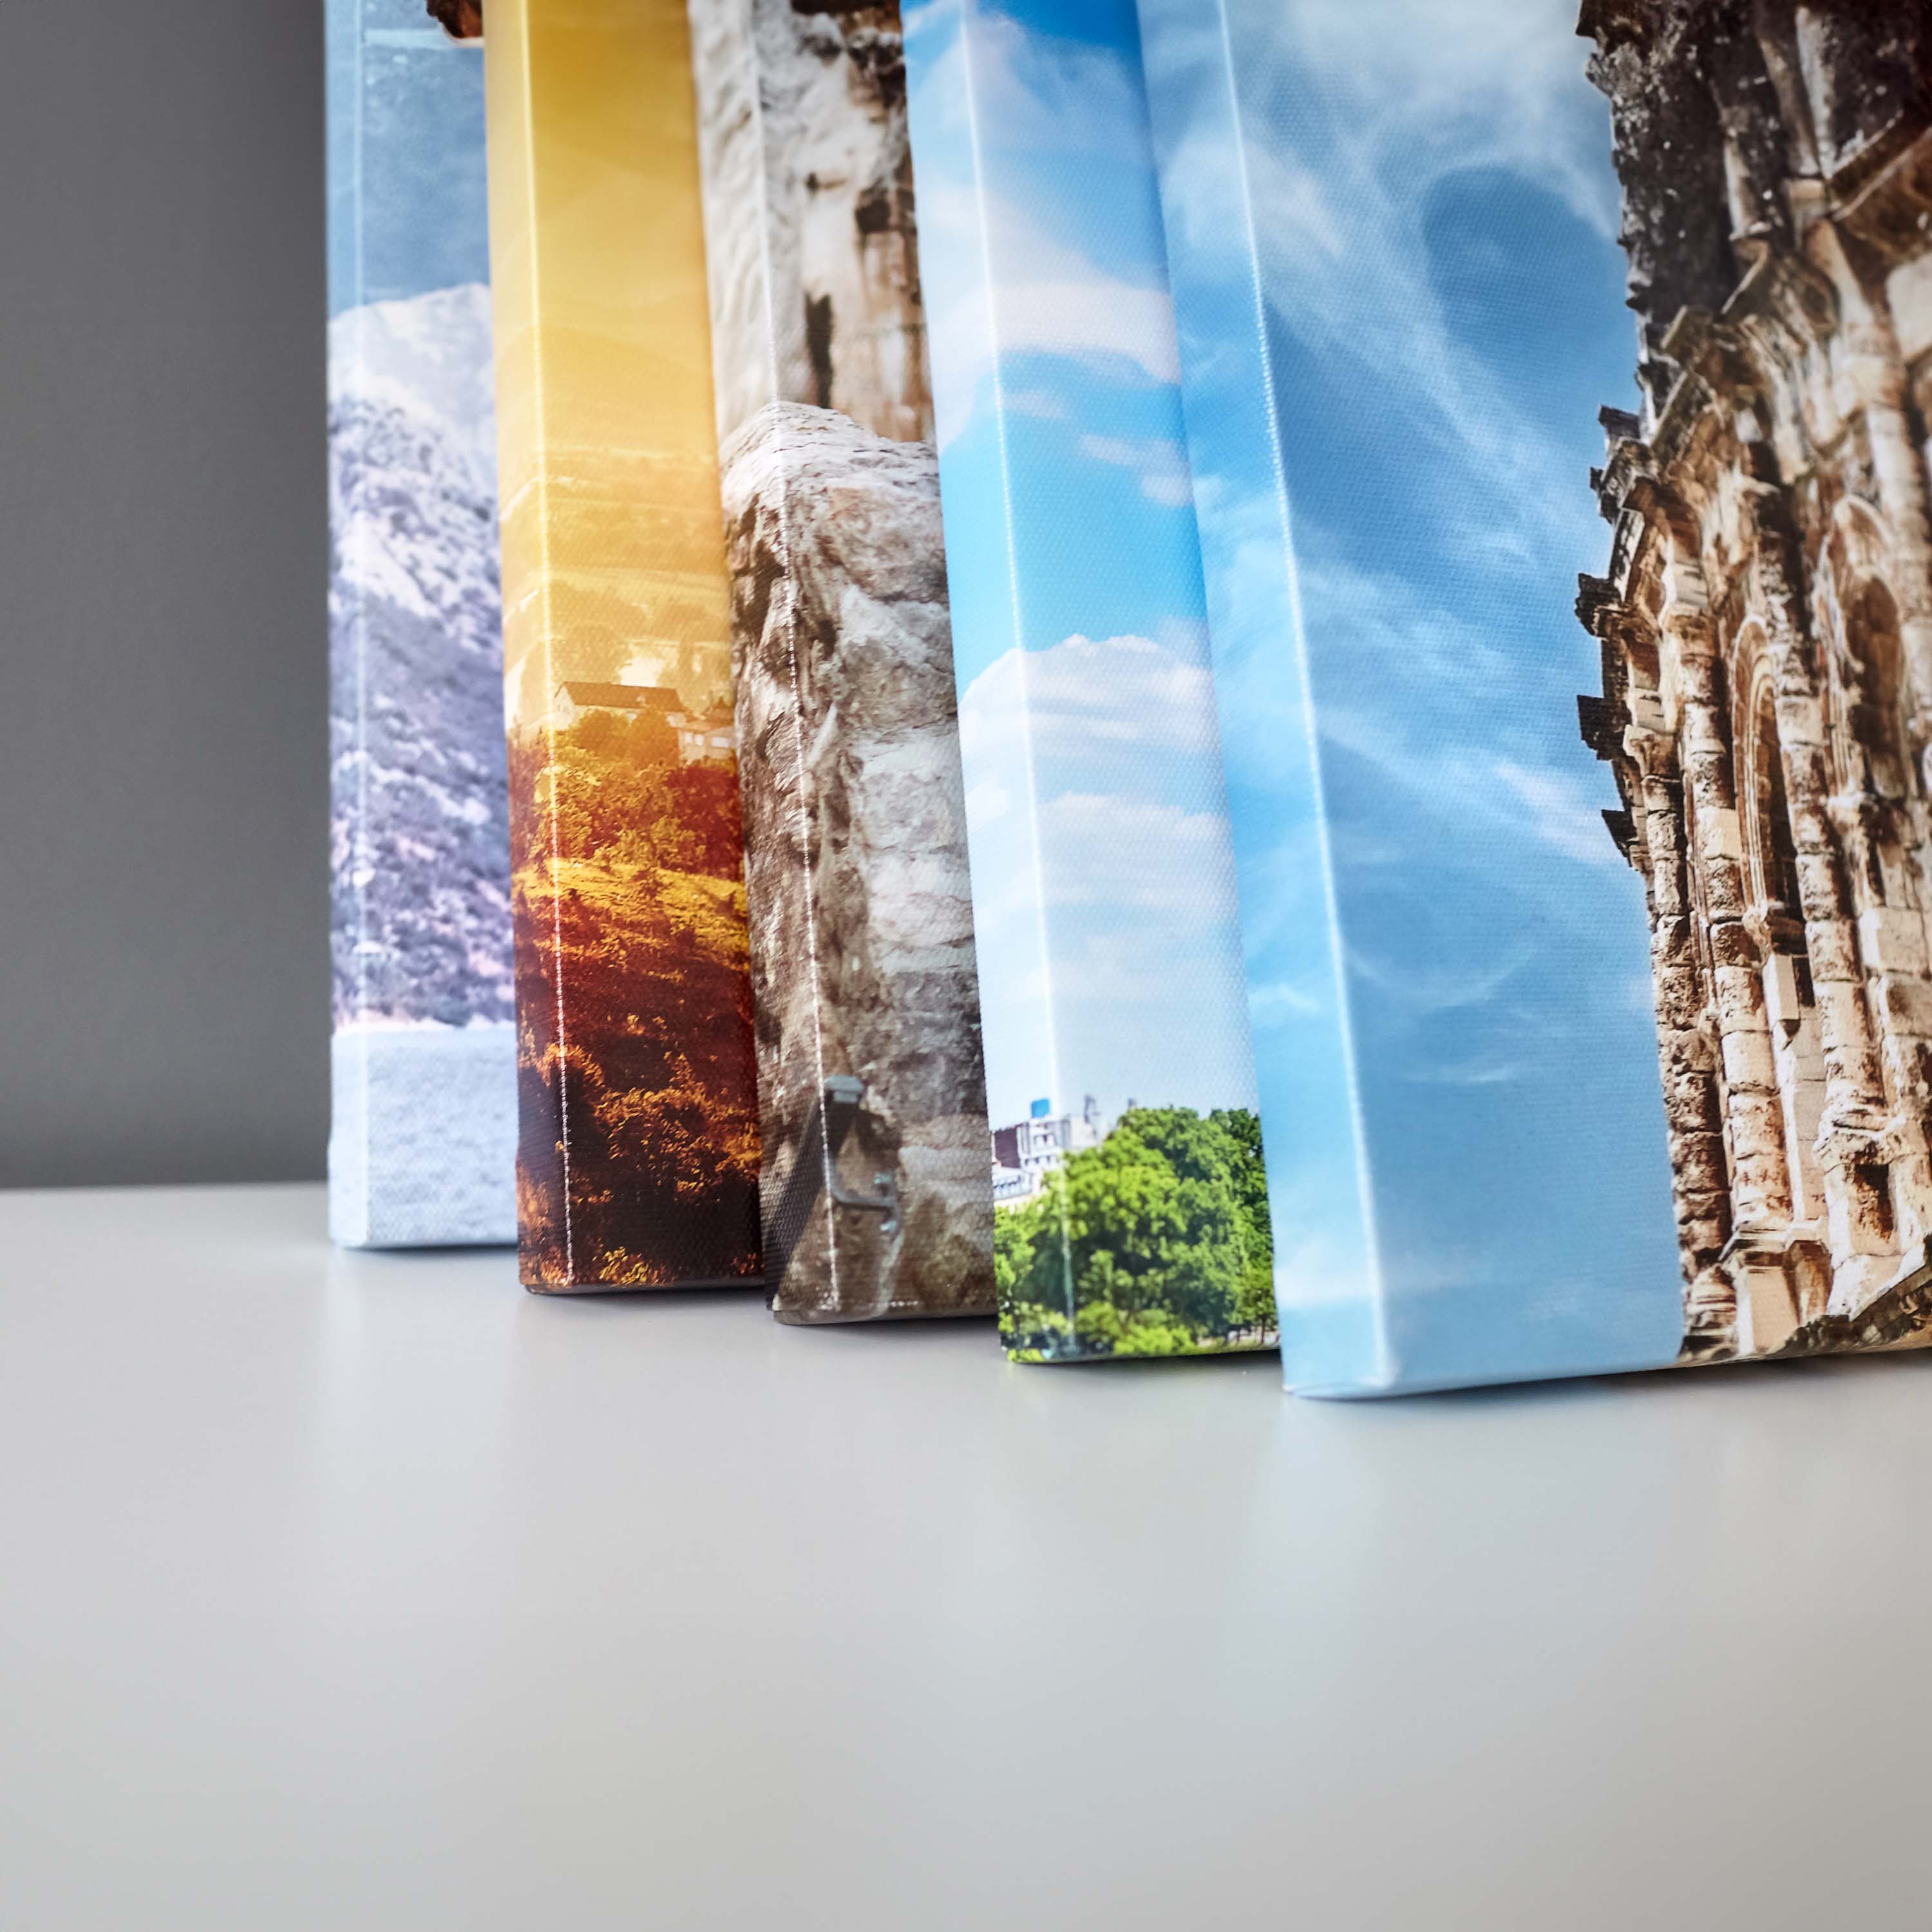 Stack of canvas art prints leaning on wall.